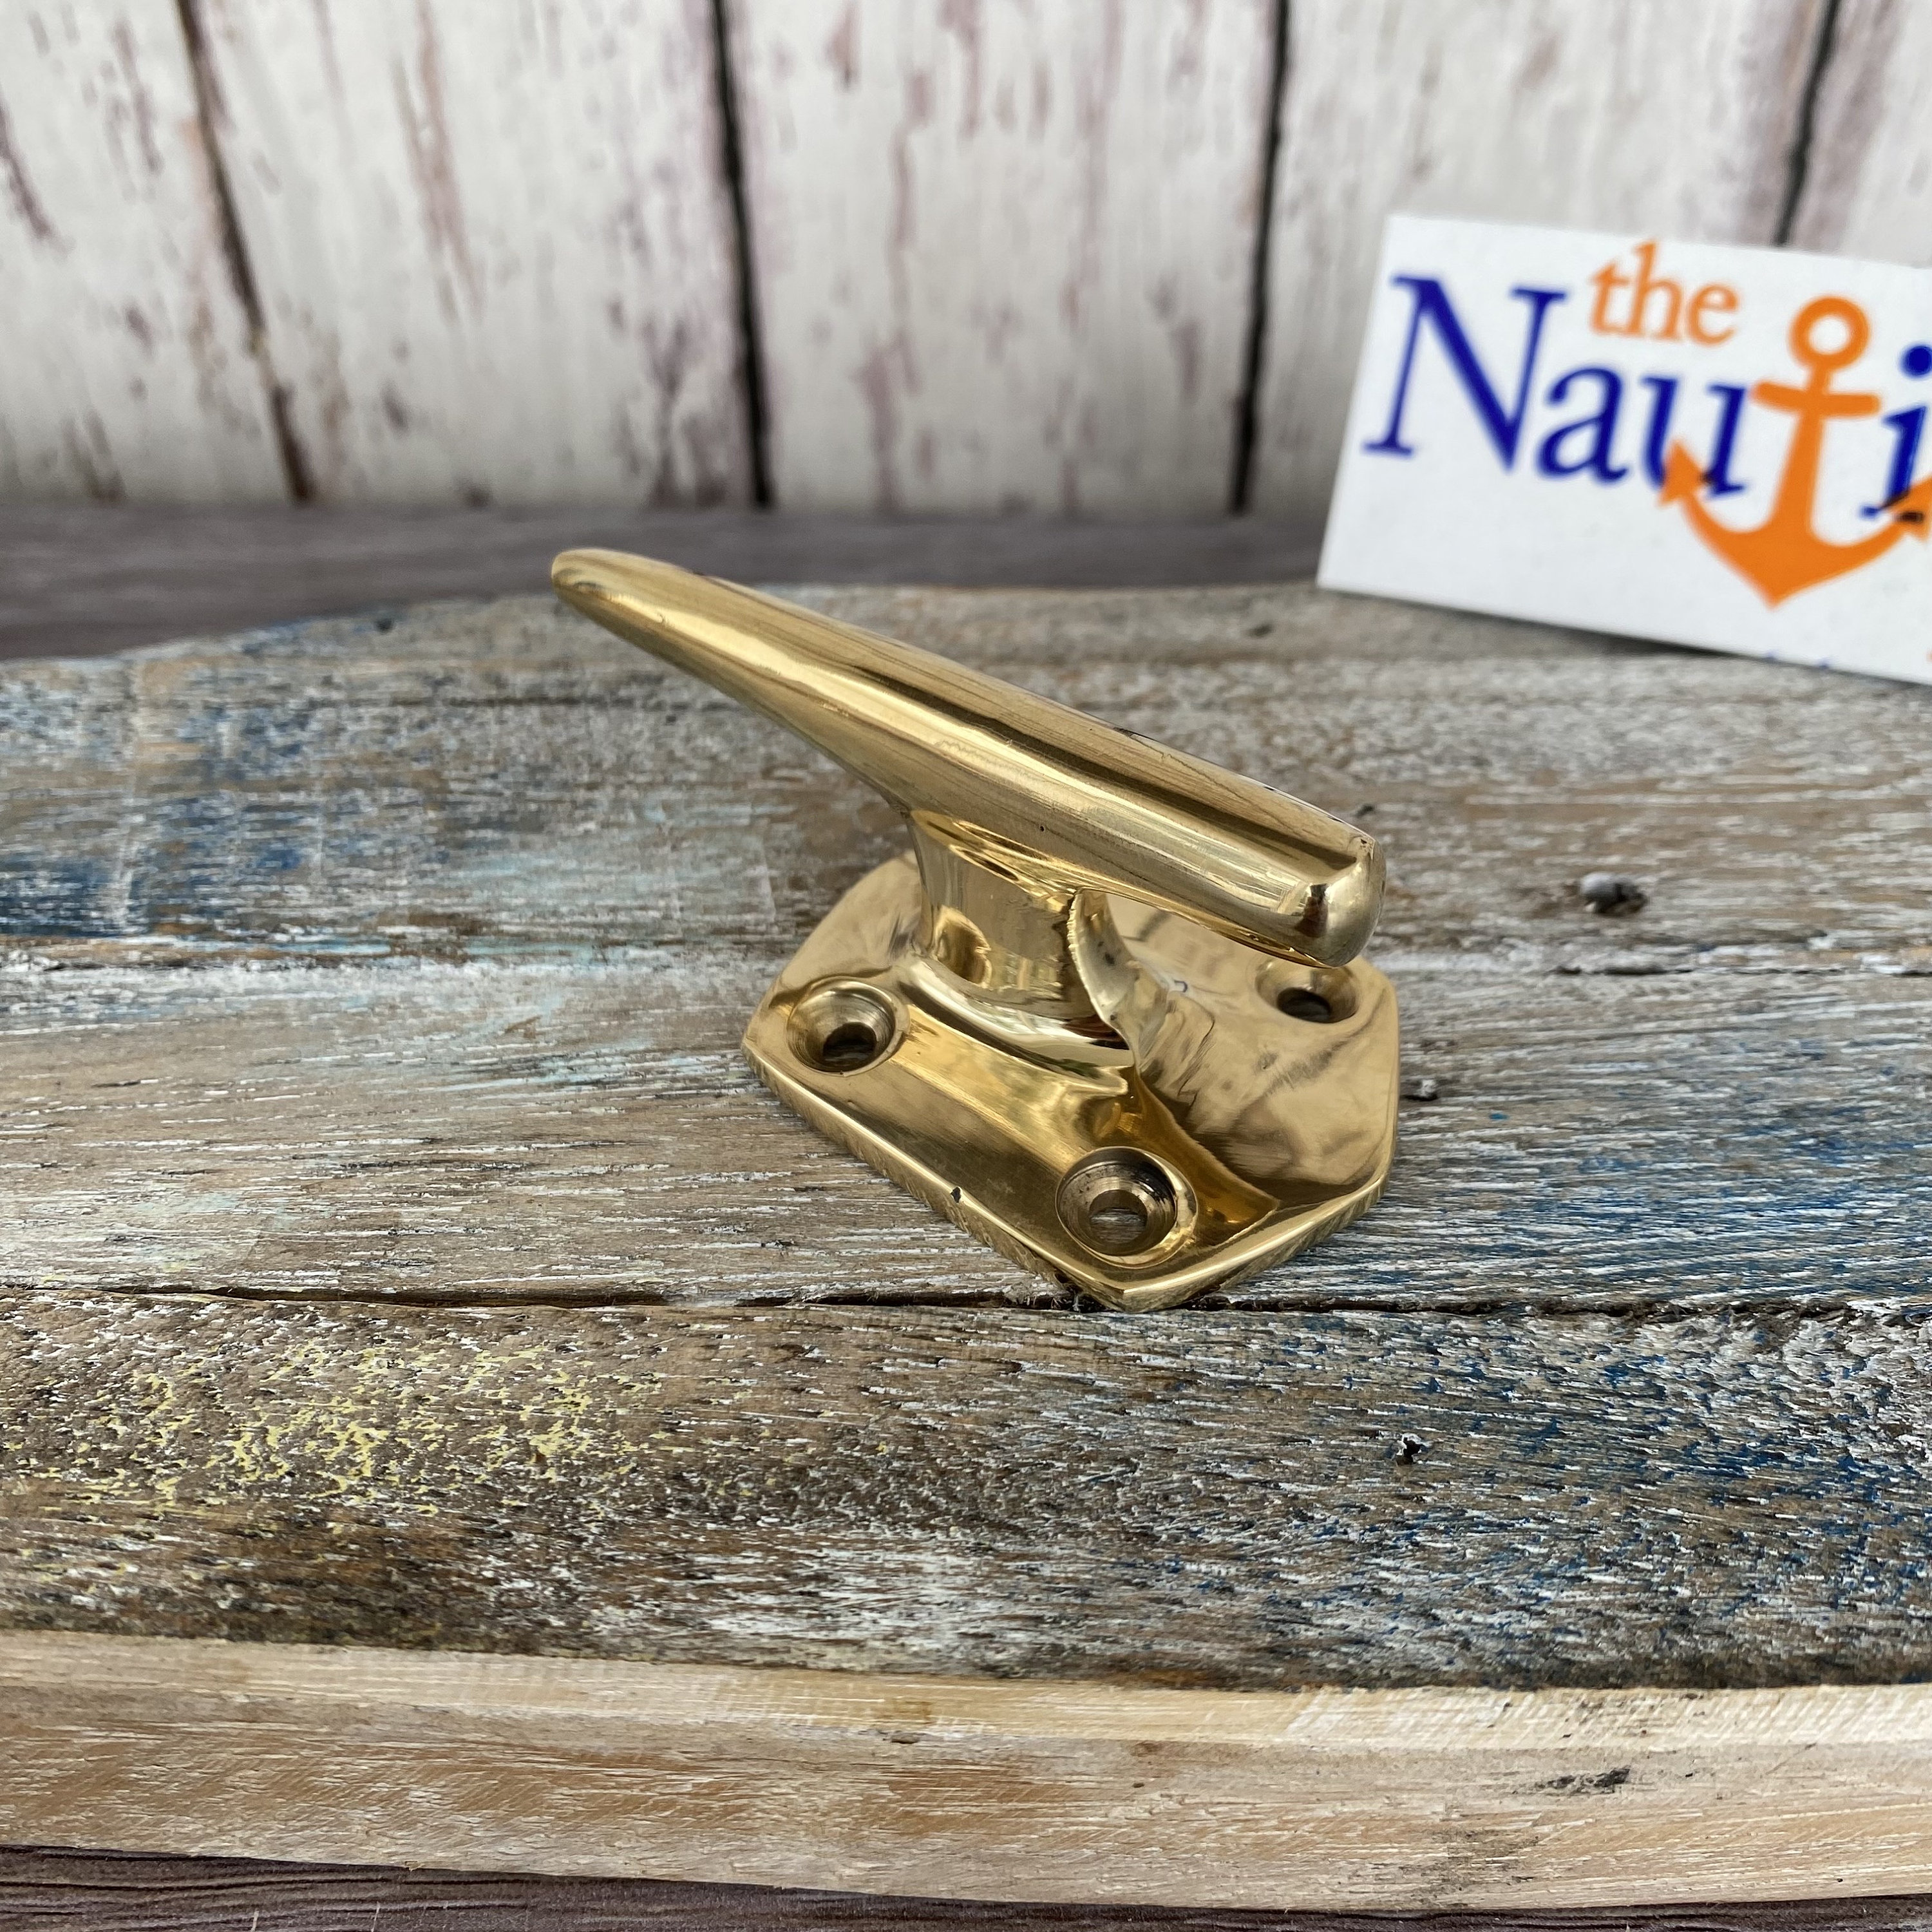 Solid Brass Cleats - Cabinet Handle Hardware - Nautical Wall Hooks